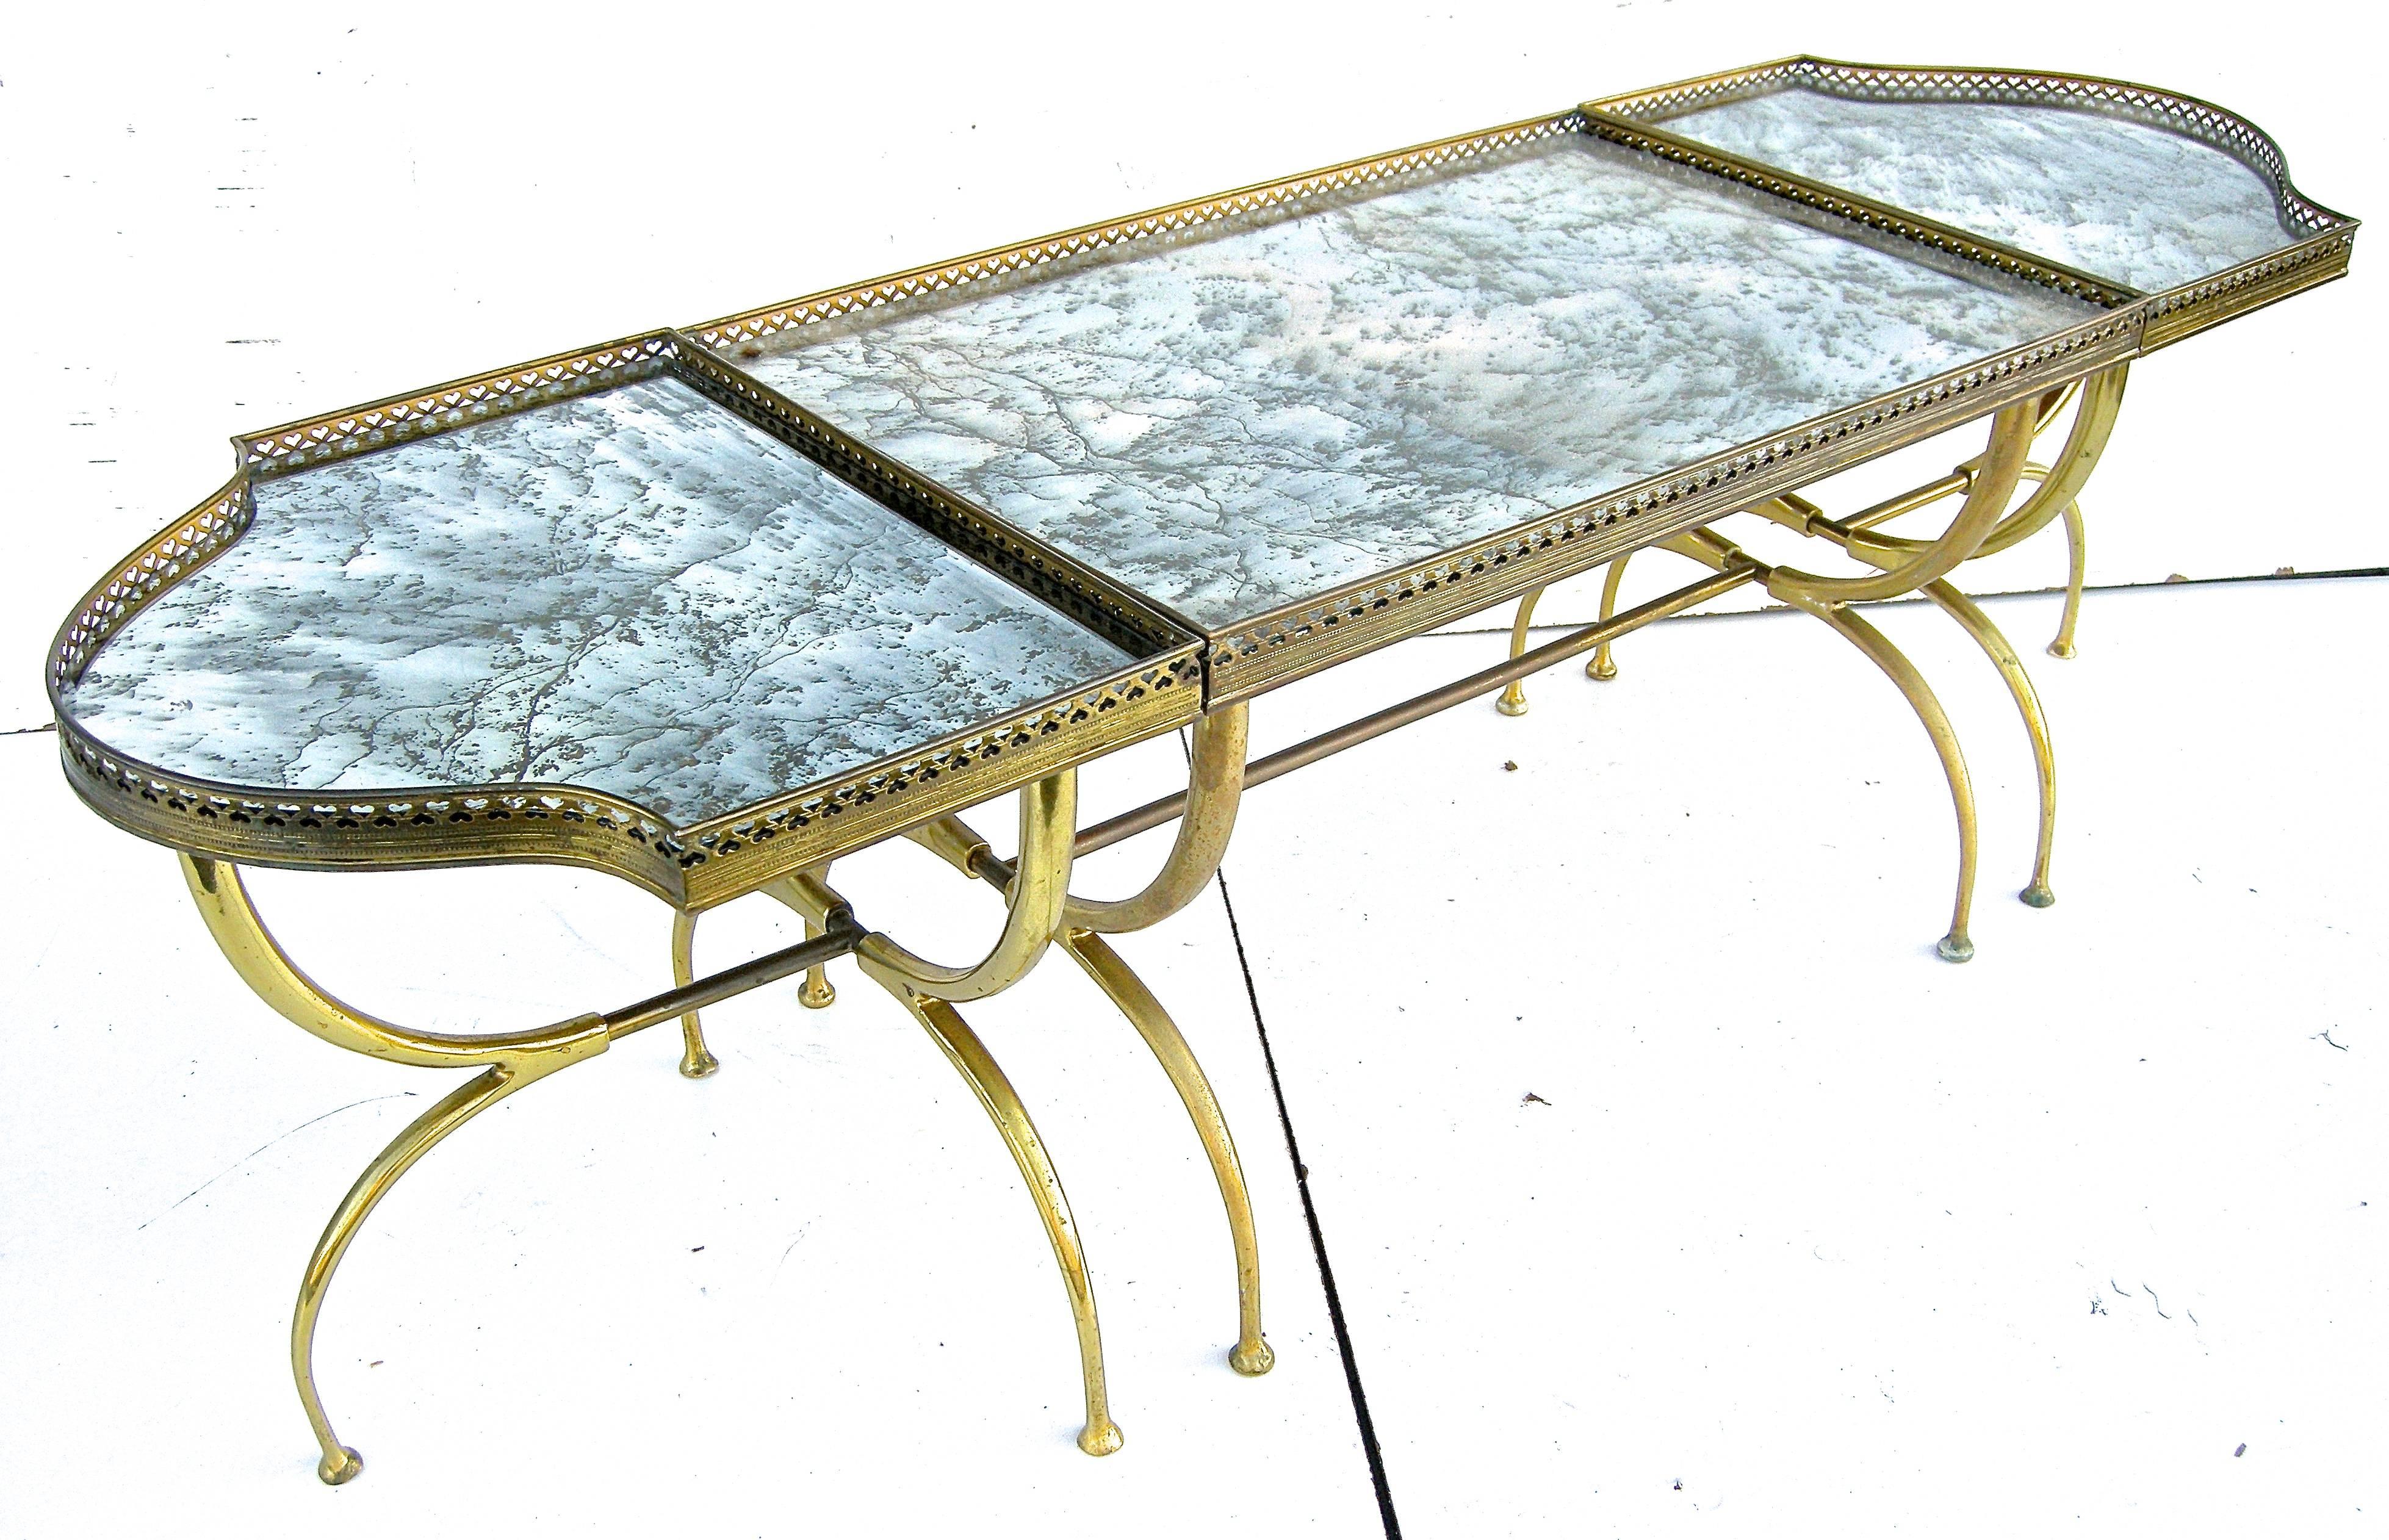 Elegant, vintage Italian, mirrored and brass coffee table. Sophisticated, detachable, trio of separate tables forming stylish, individual shapes and forms. Having detailed, perforated galleries atop curving sinewy bases/legs. Warm oxidized, aged